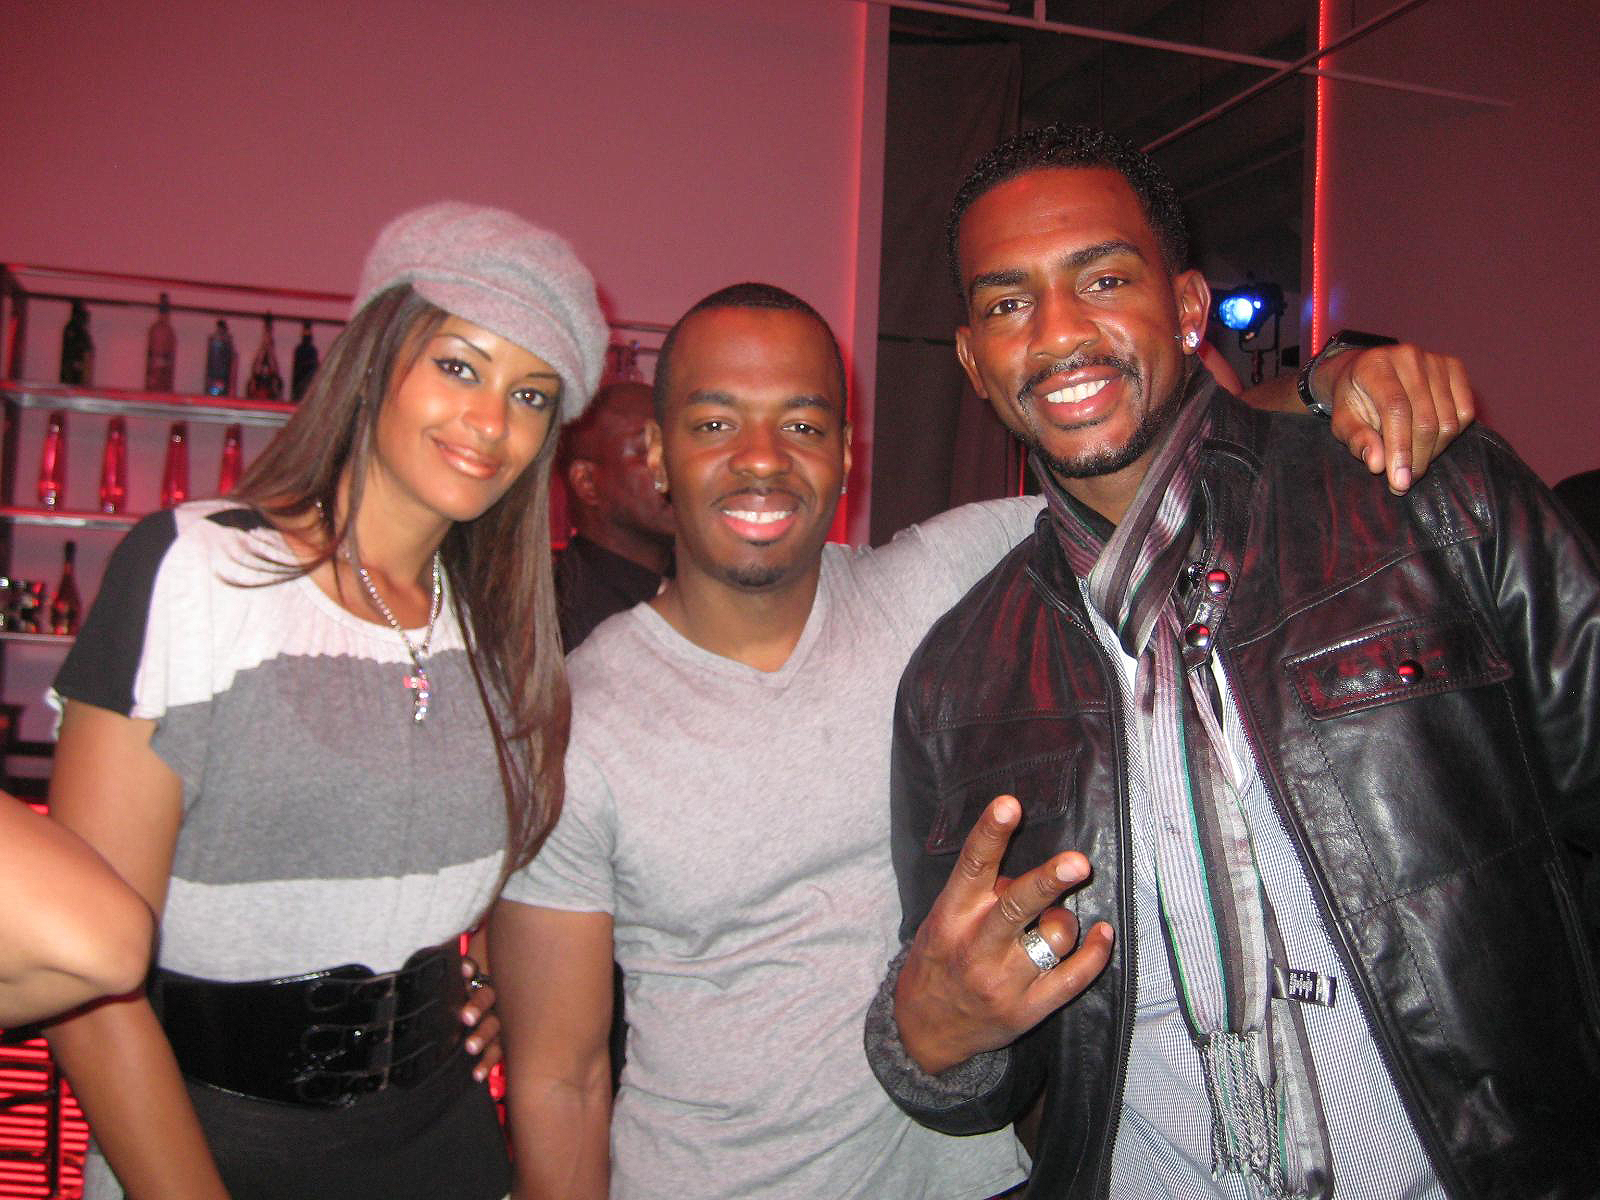 Director Marques T. Owens, Bill Bellamy, and Claudia Jordan. On set while shooting for Untitled Jamie Foxx Documentary.